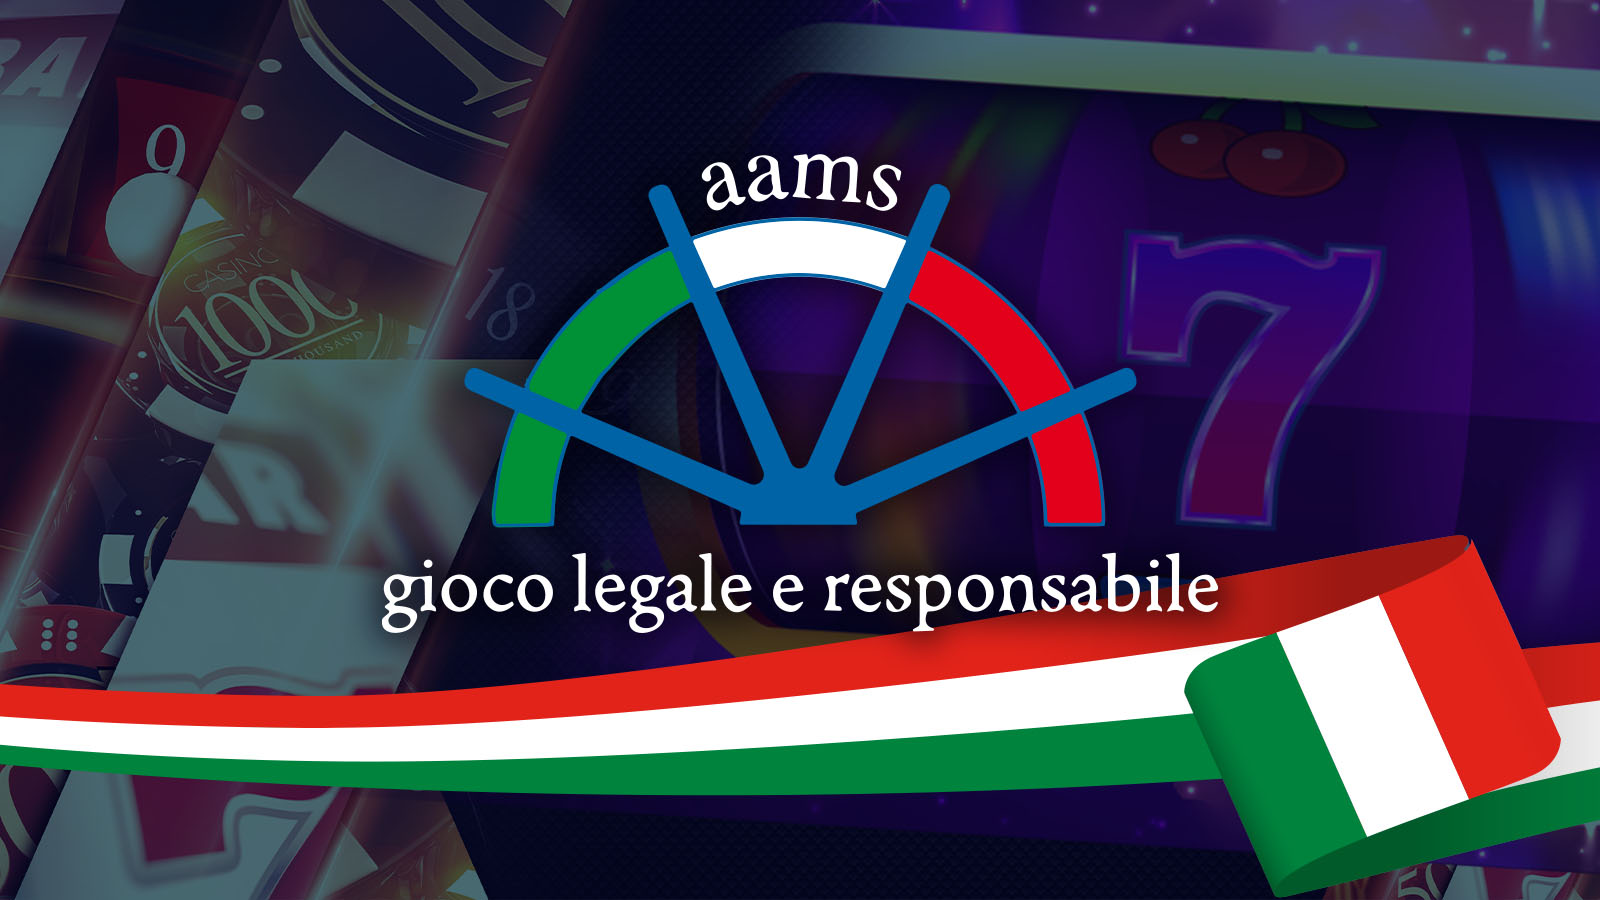 AAMS Italian Gambling License-Providing online casinos with credibility